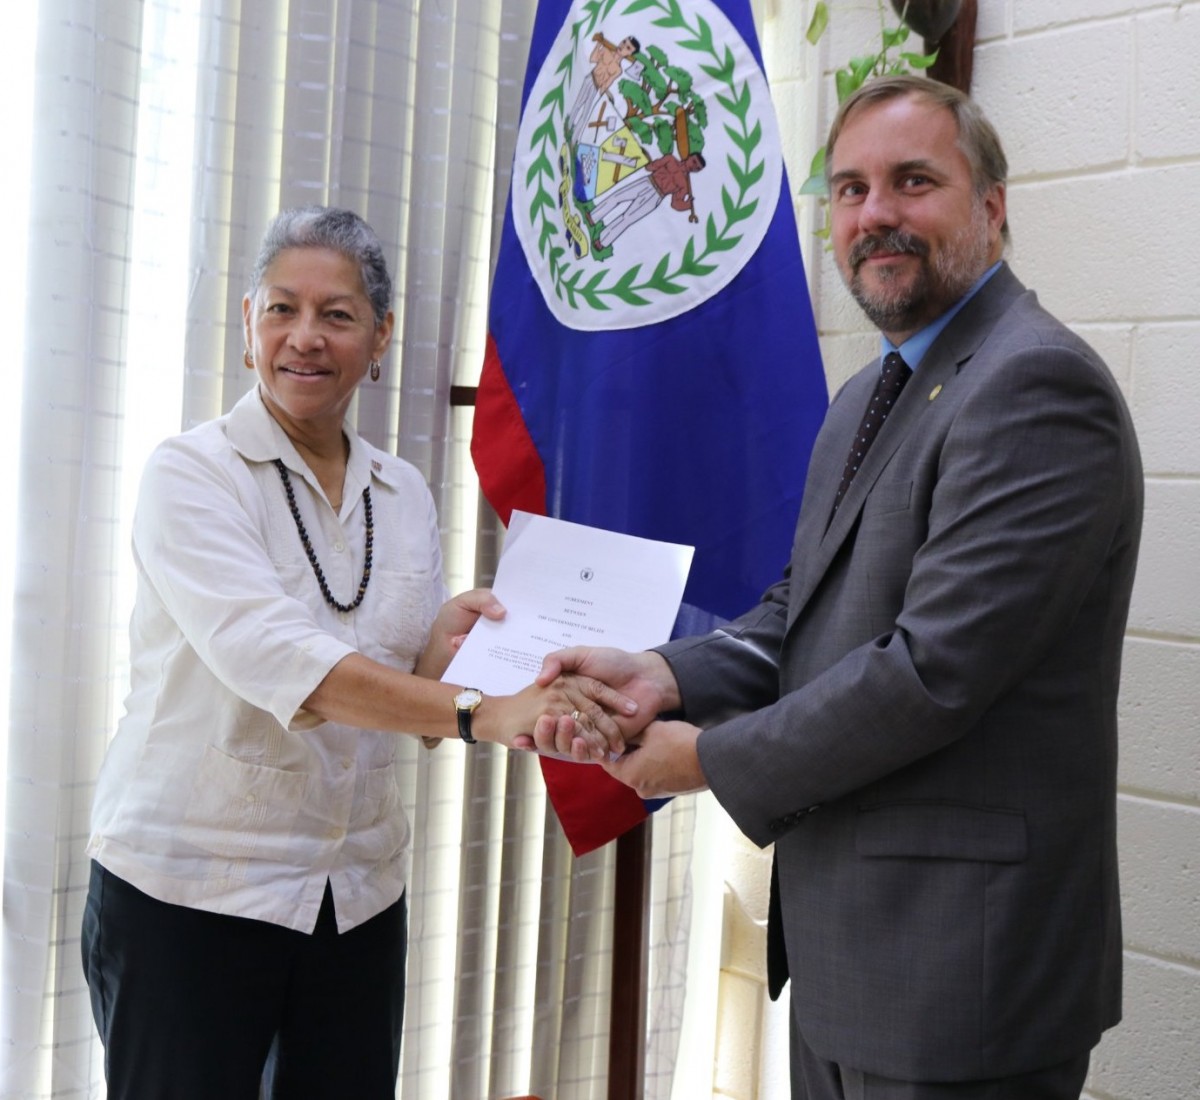 Caribbean News Global WFP_GOB-Signing-3 WFP – Belize to increase protection for most vulnerable through climate risk insurance  